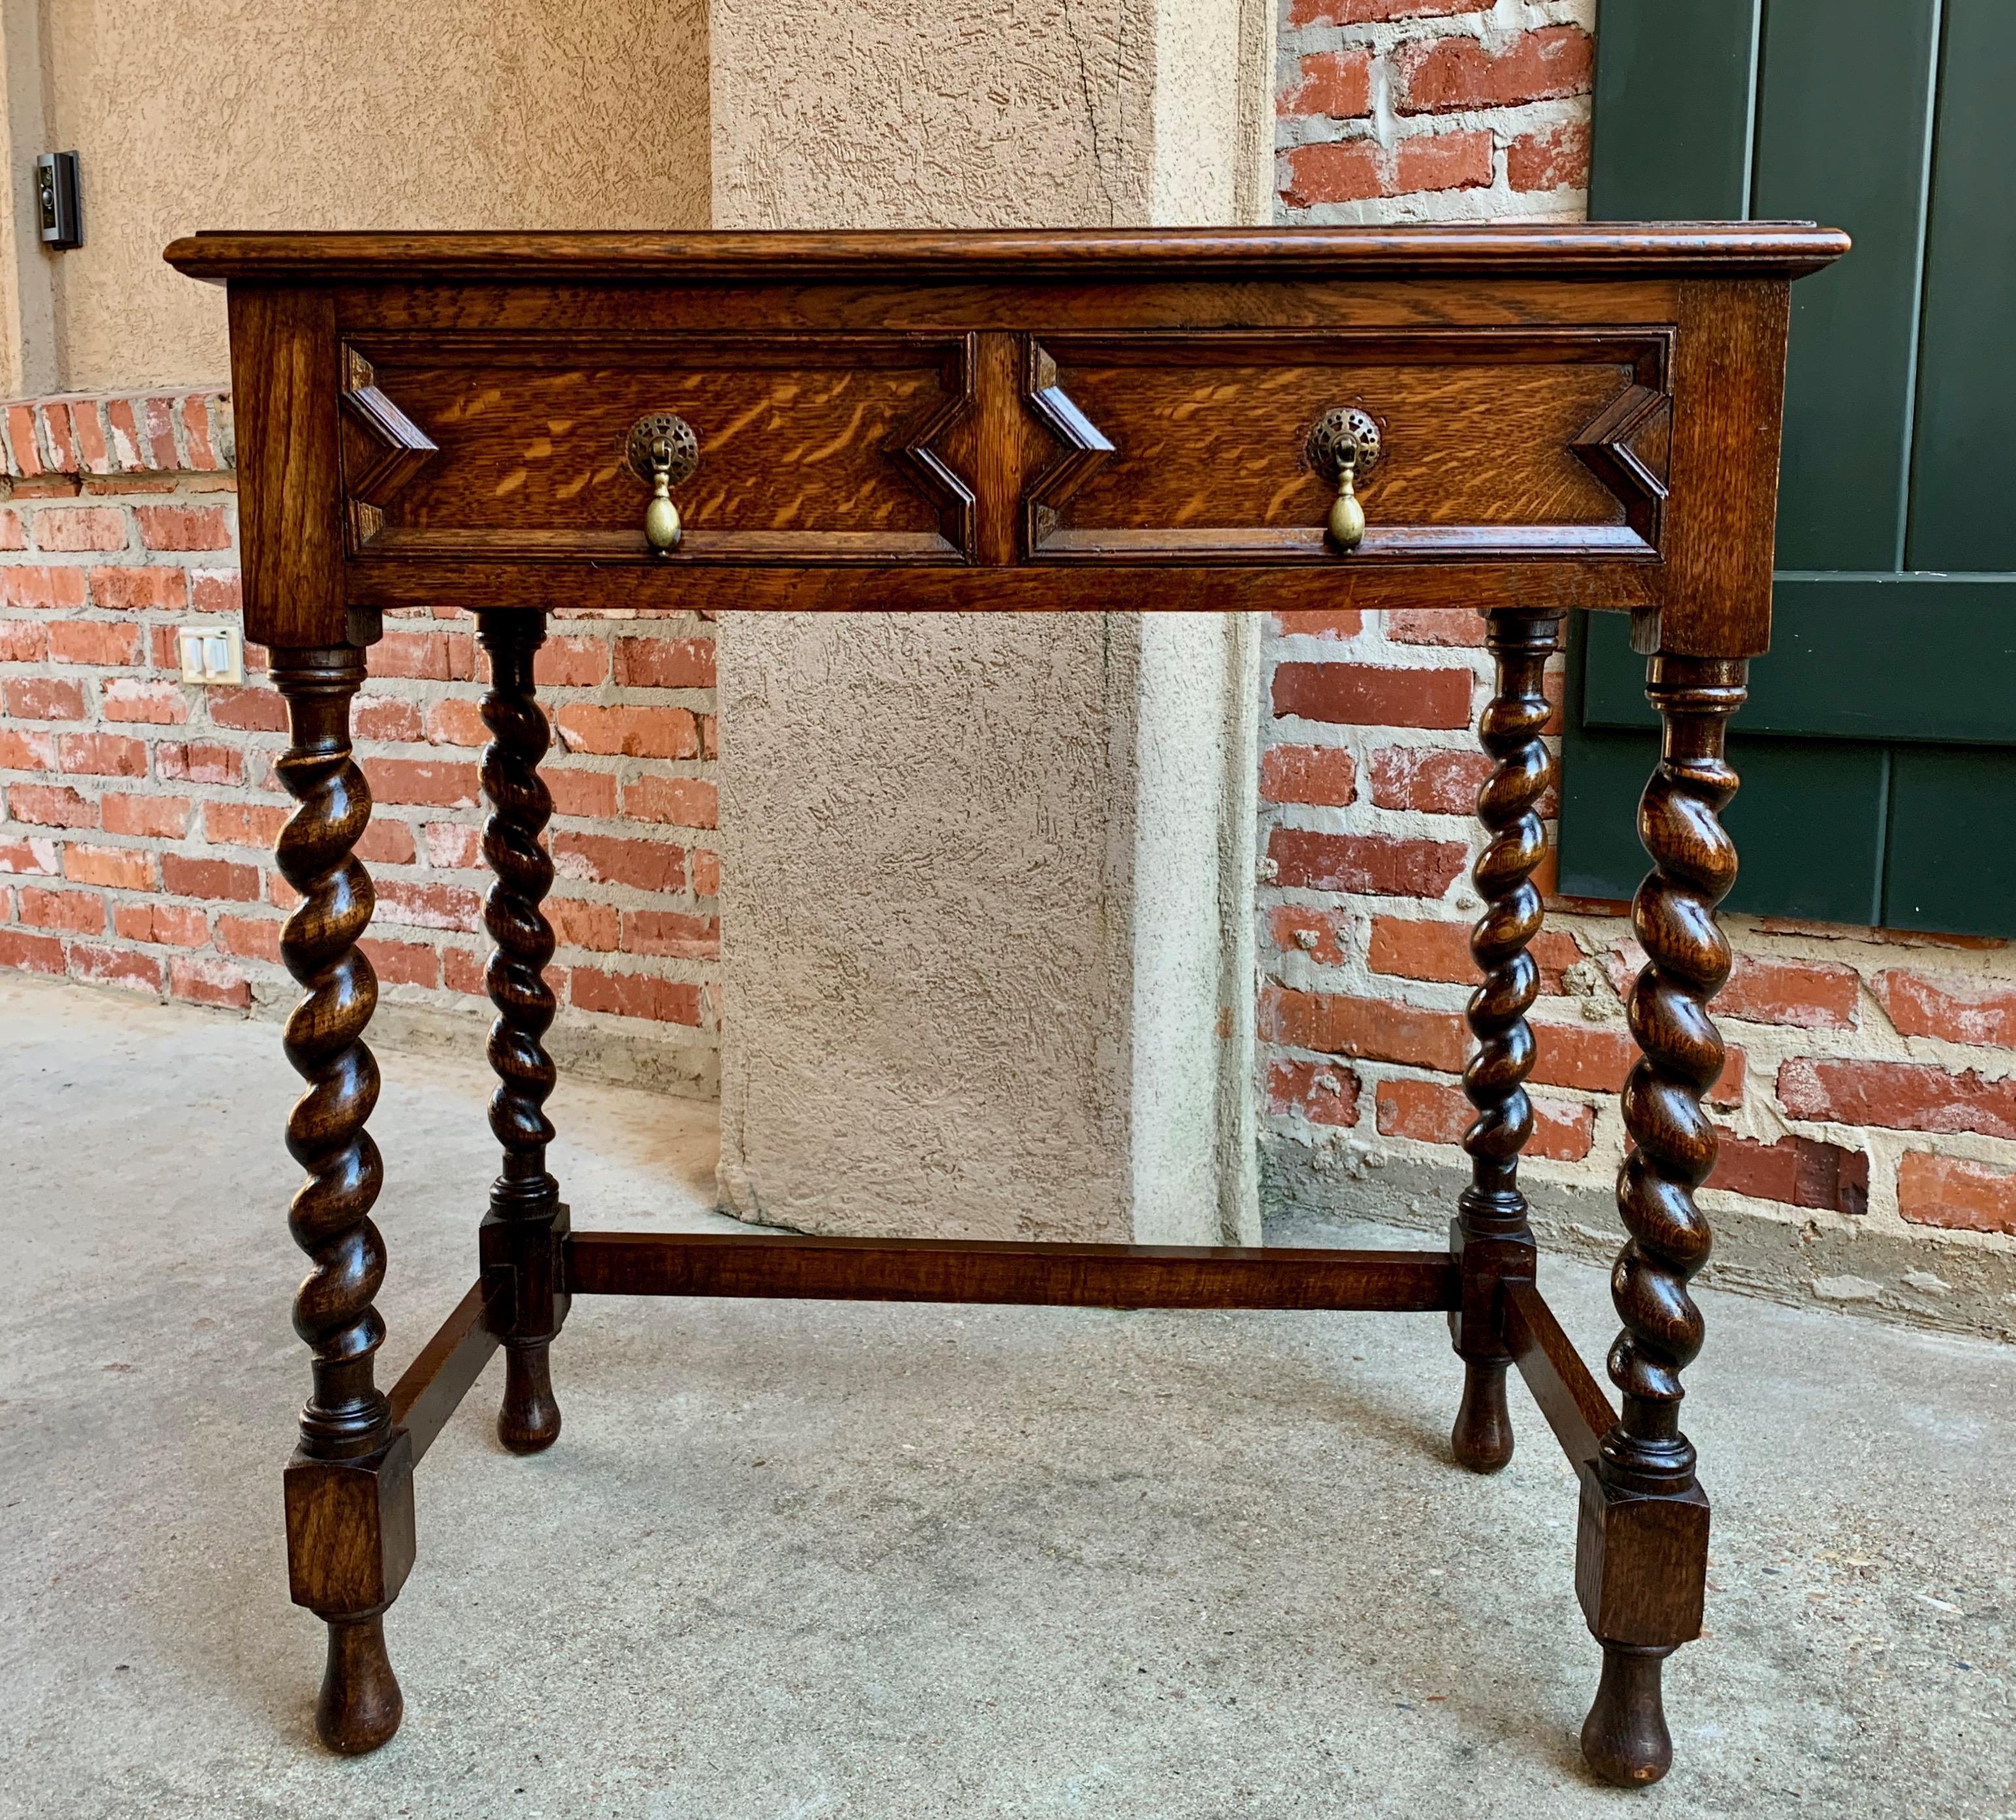 Direct from England, a lovely and versatile antique English tiger oak sofa table or desk!~
~Classic English barley twist legs (front and back) and venerable British style, certain to compliment any placement in your home!~
~Geometric, Jacobean